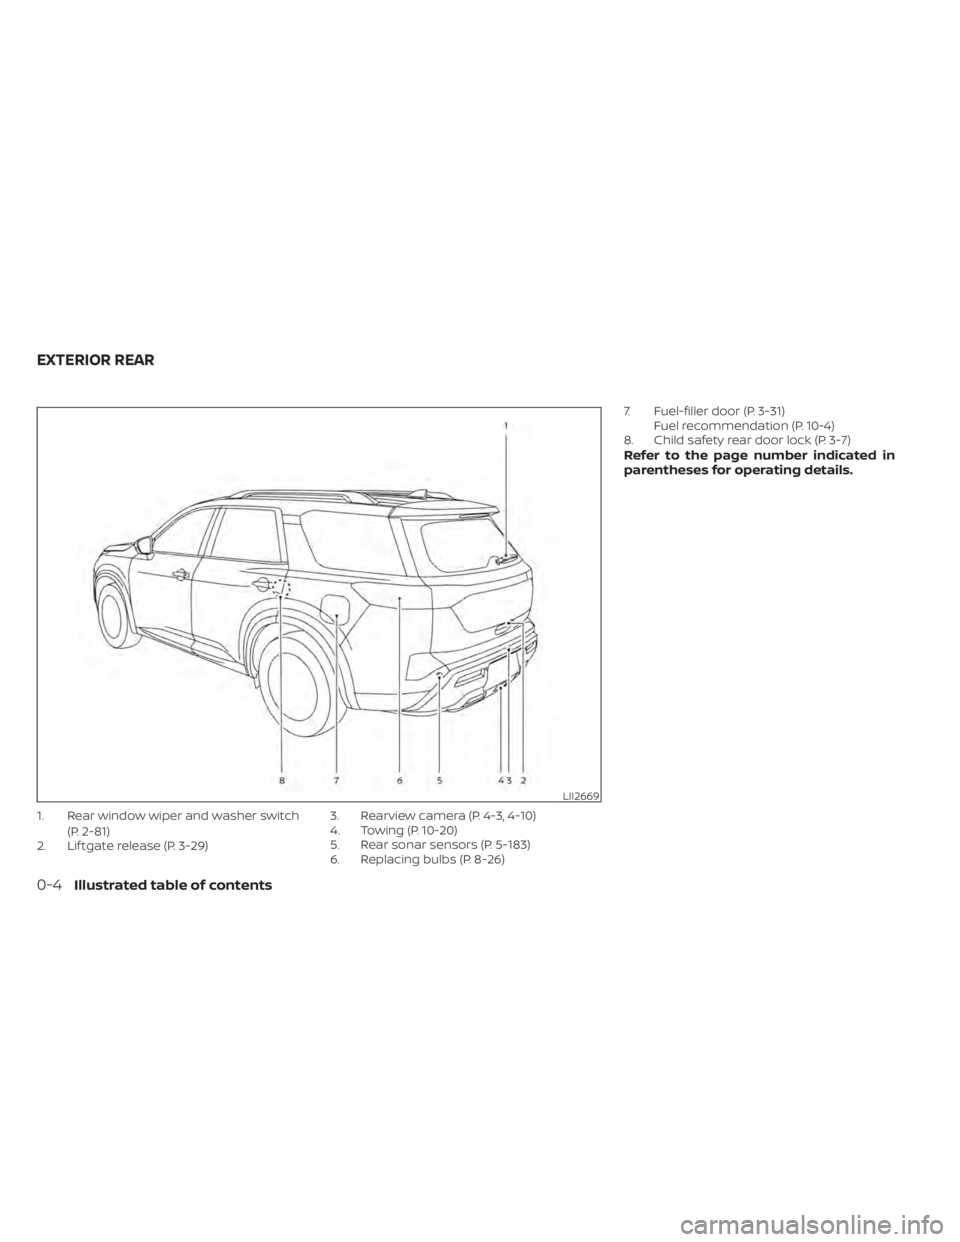 NISSAN PATHFINDER 2023 User Guide 1. Rear window wiper and washer switch(P. 2-81)
2. Lif tgate release (P. 3-29) 3. Rearview camera (P. 4-3, 4-10)
4. Towing (P. 10-20)
5. Rear sonar sensors (P. 5-183)
6. Replacing bulbs (P. 8-26)7. Fu